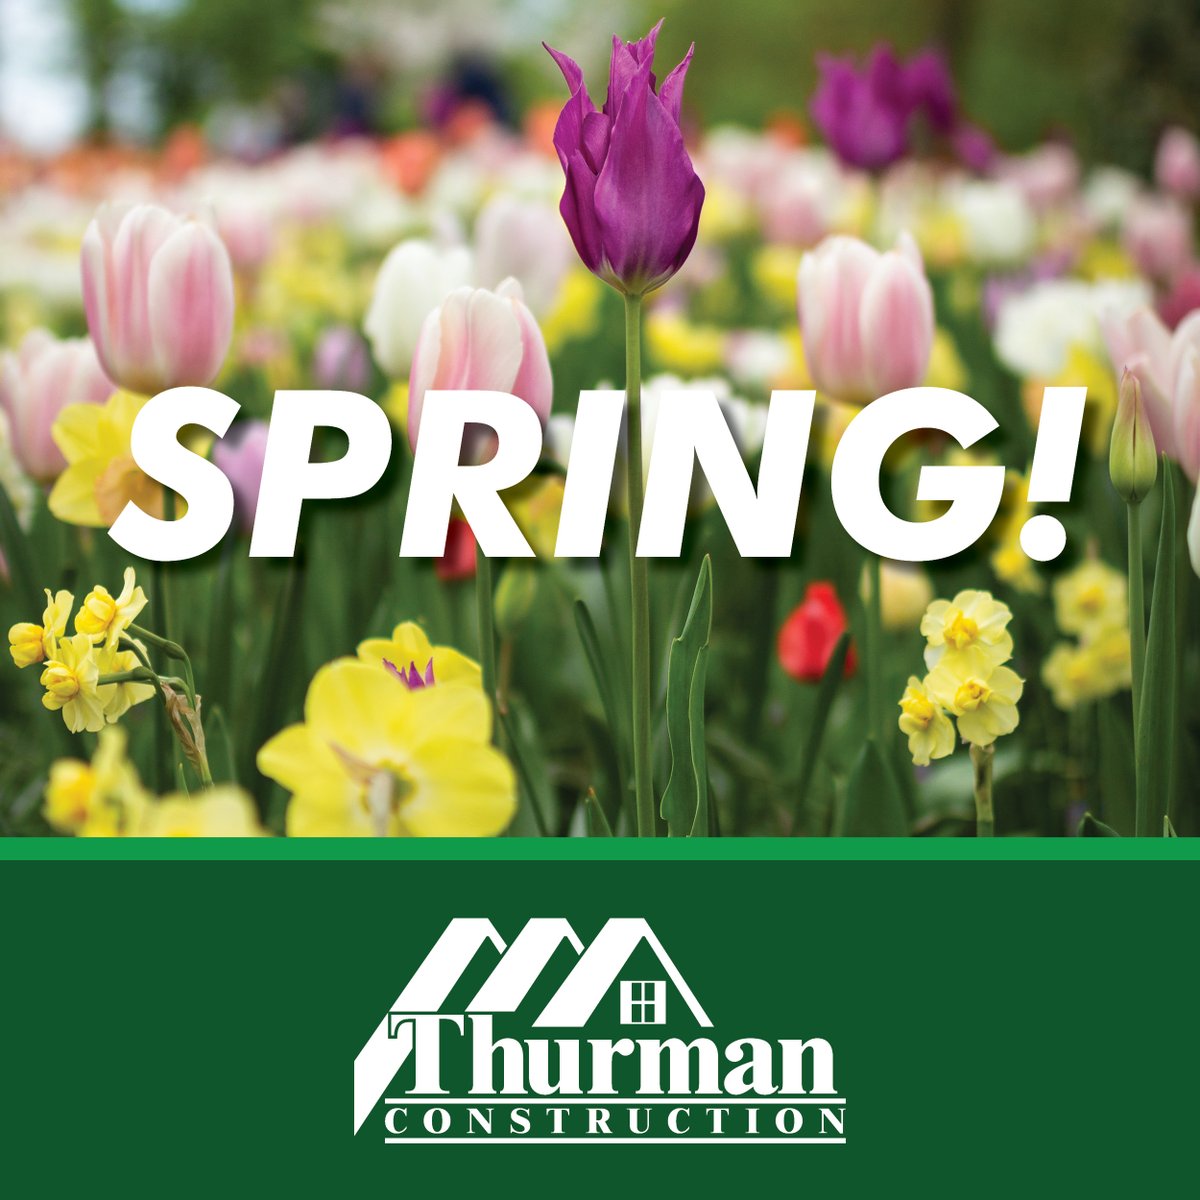 #Spring is in the air at Thurman Construction and we are gearing up for warm weather. Call 605.334.3217 to talk to a #HomeConstruction expert today!